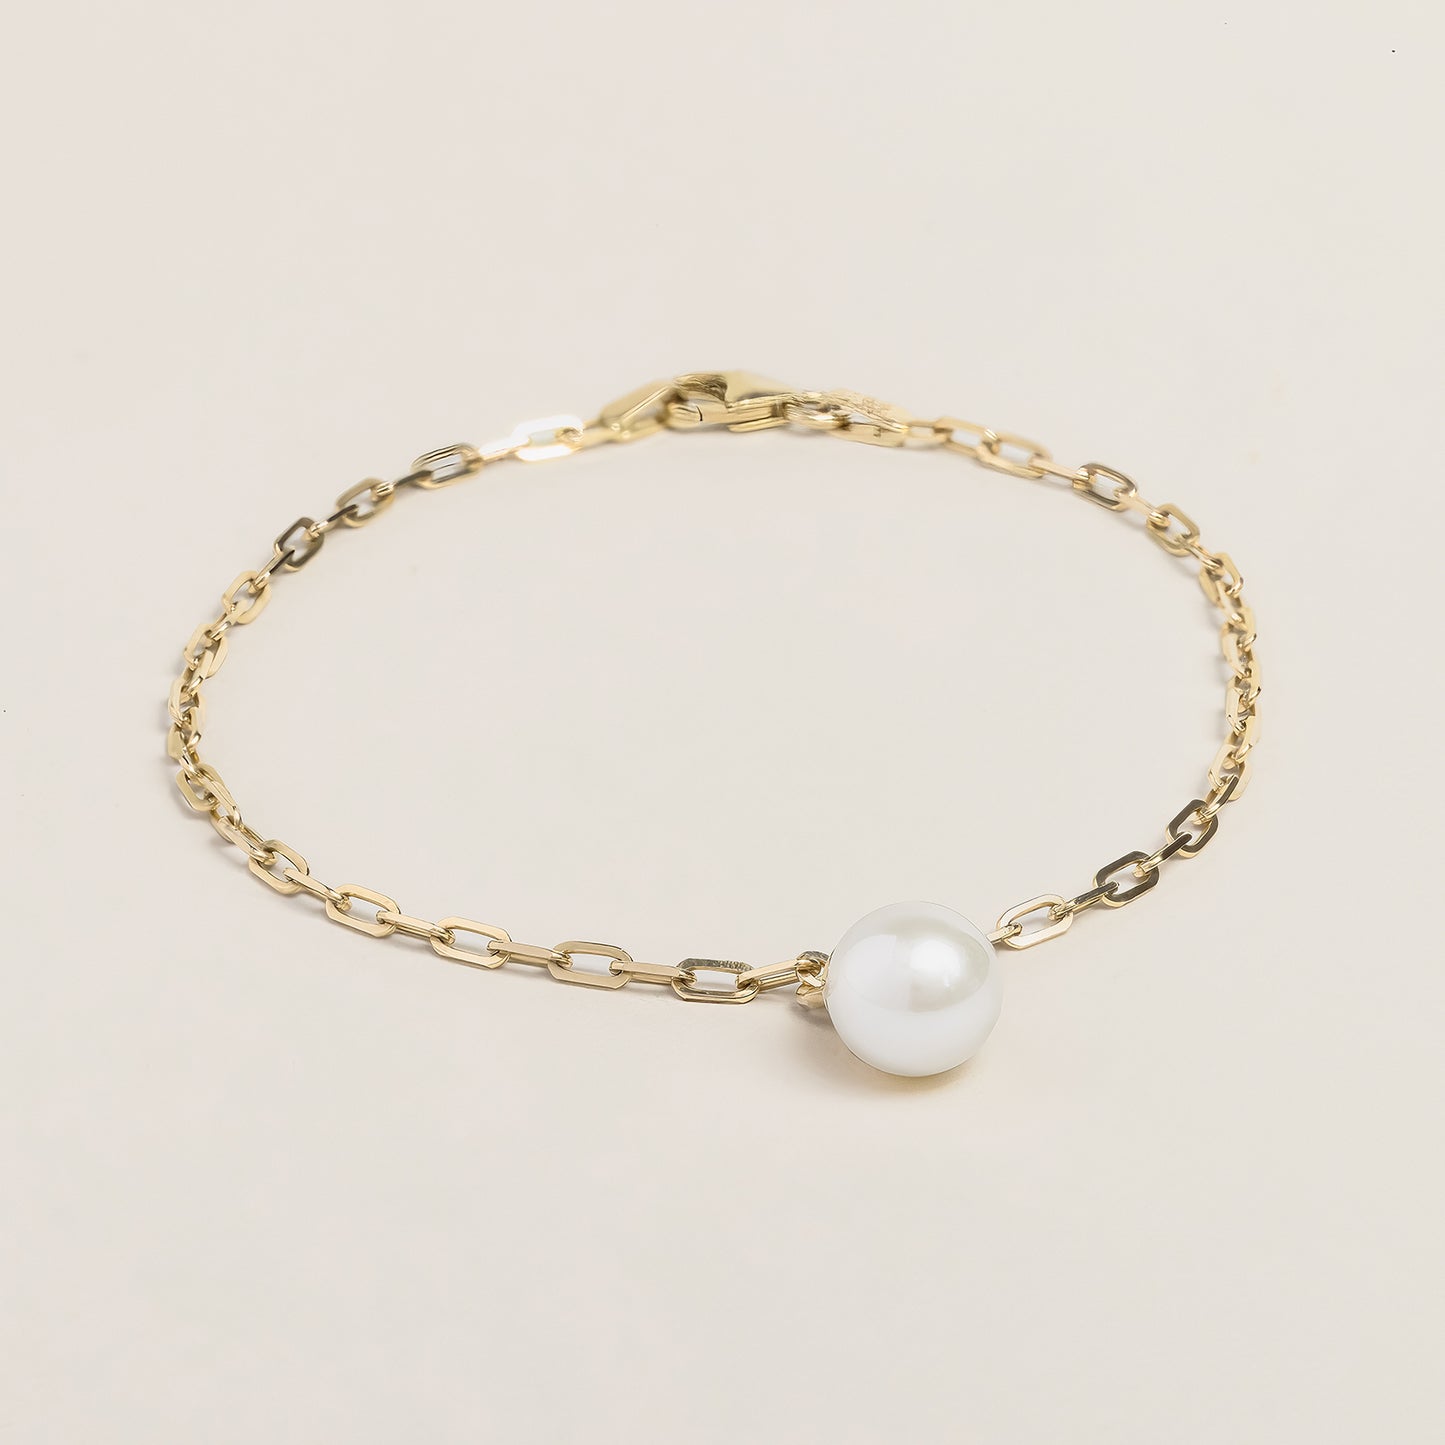 Paperclip bracelet with Pearl Charm